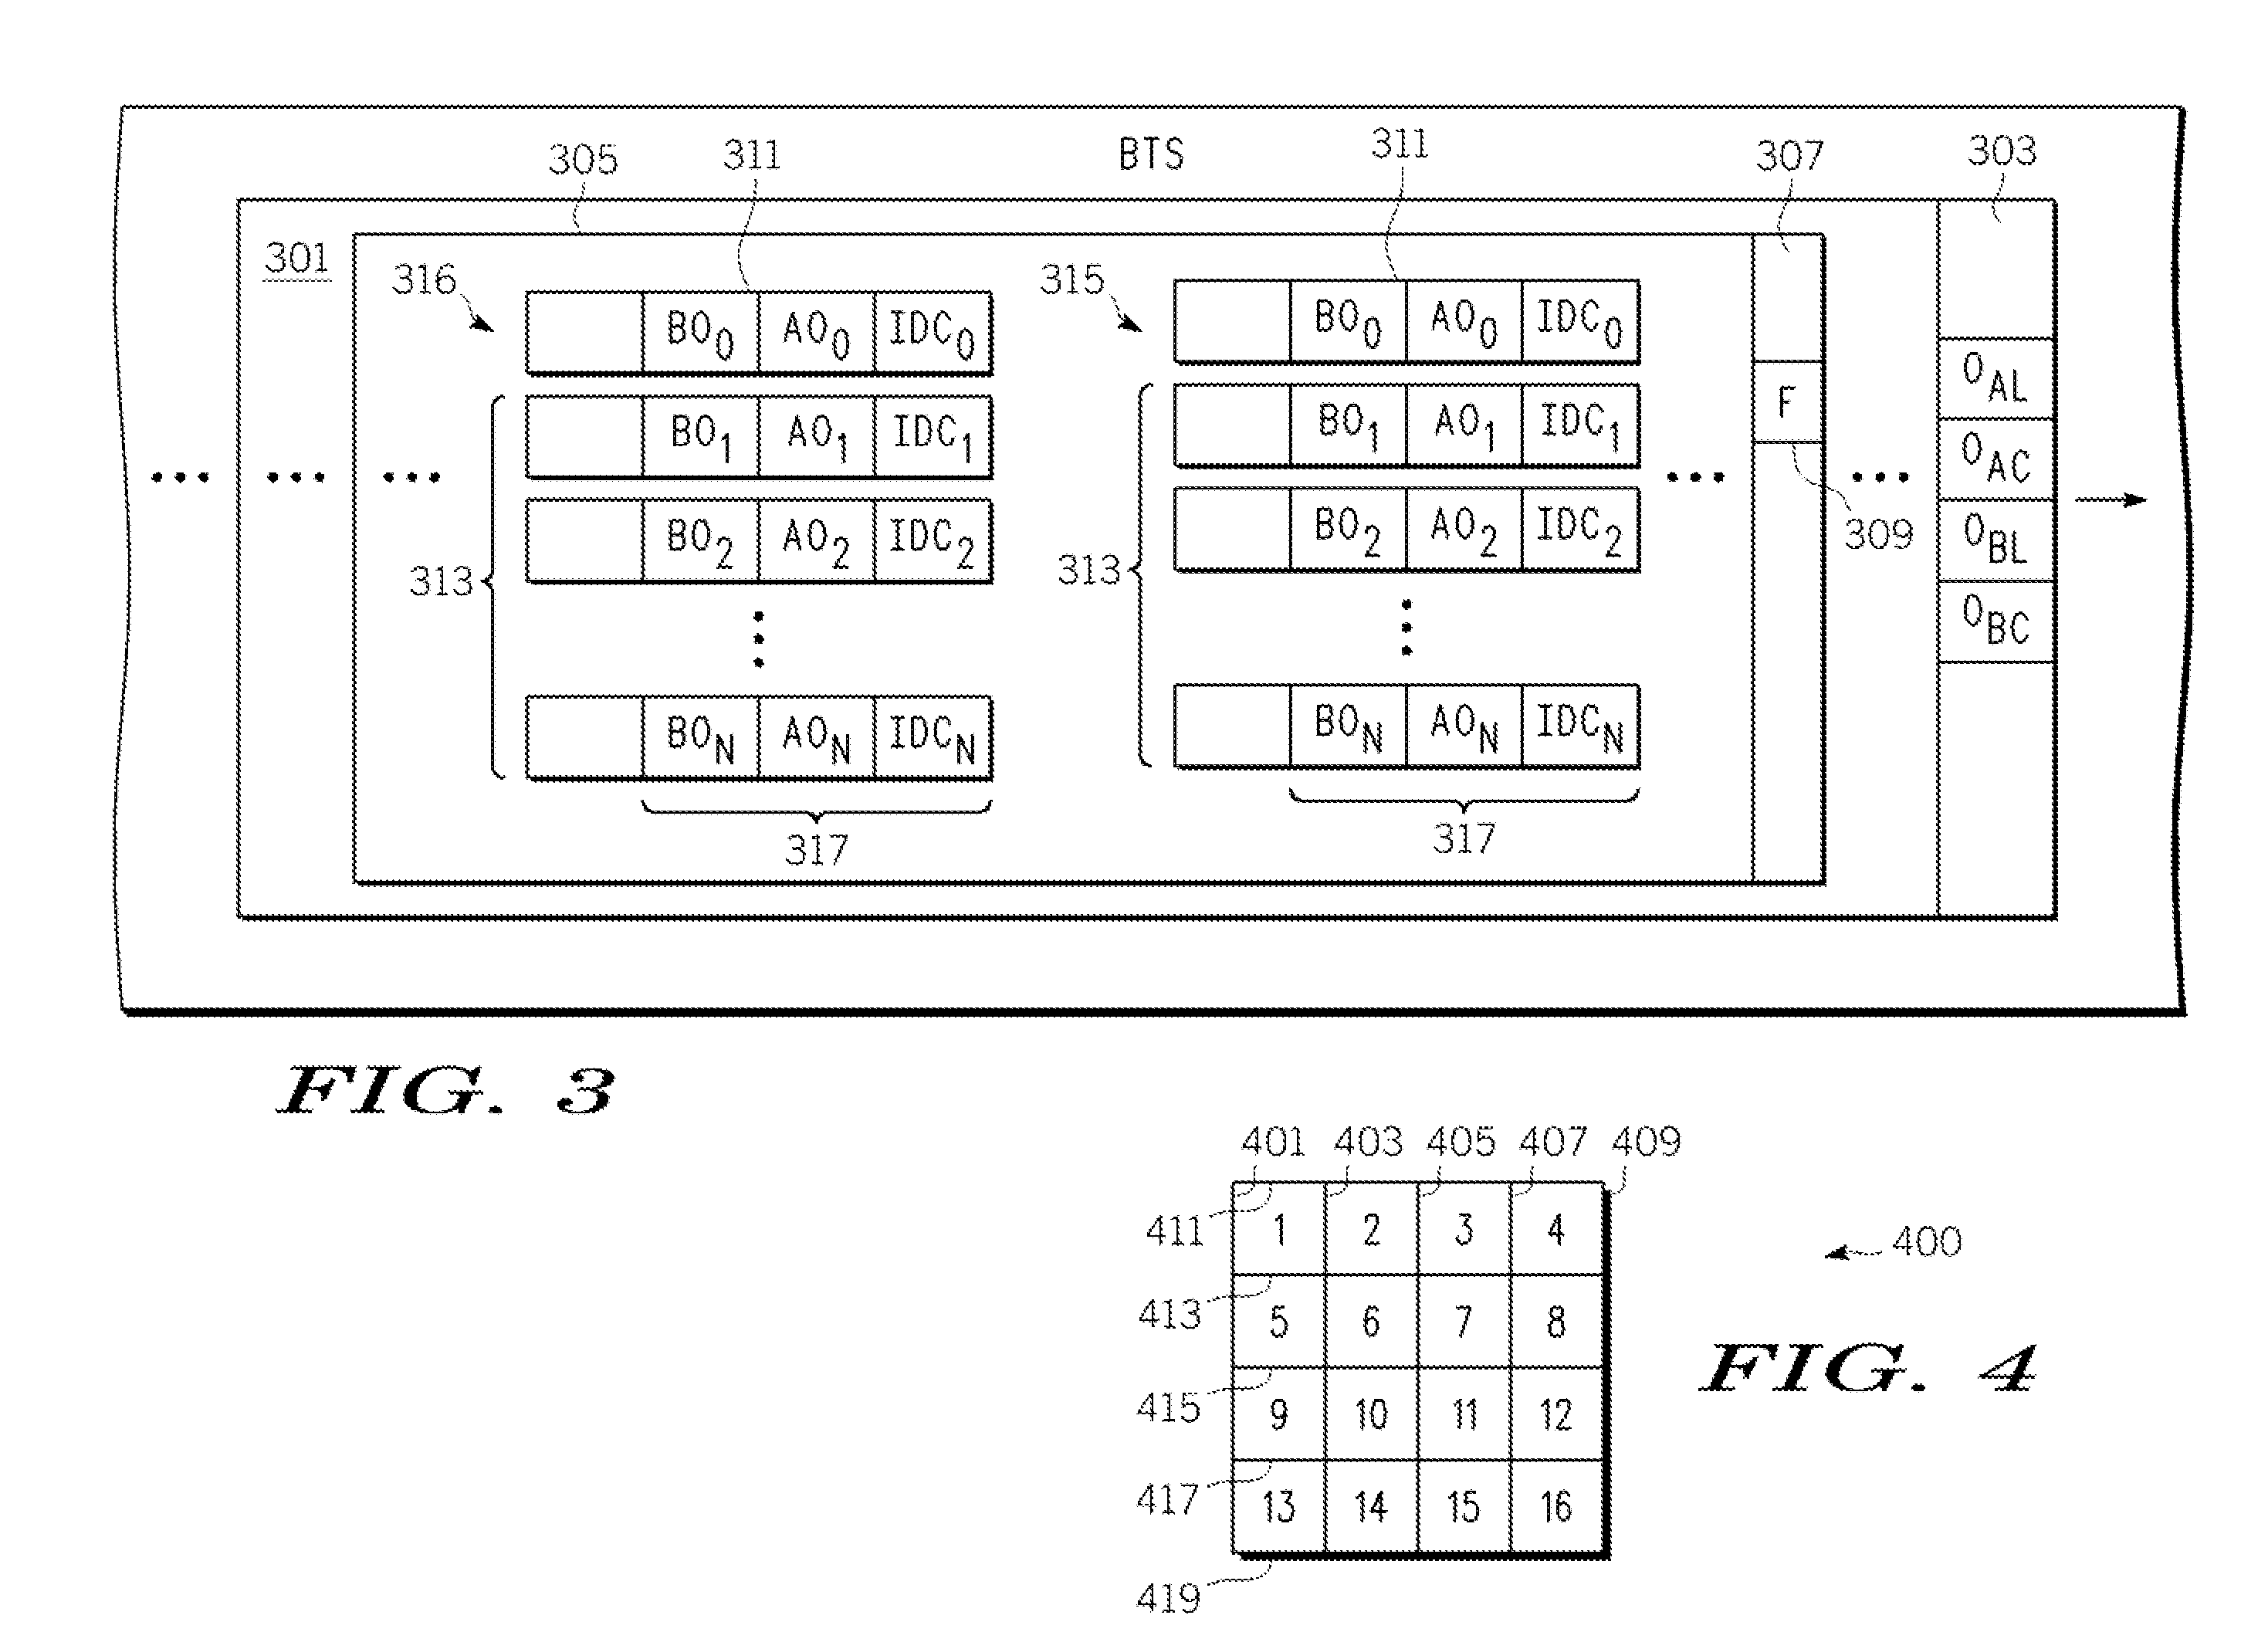 Simplified deblock filtering for reduced memory access and computational complexity